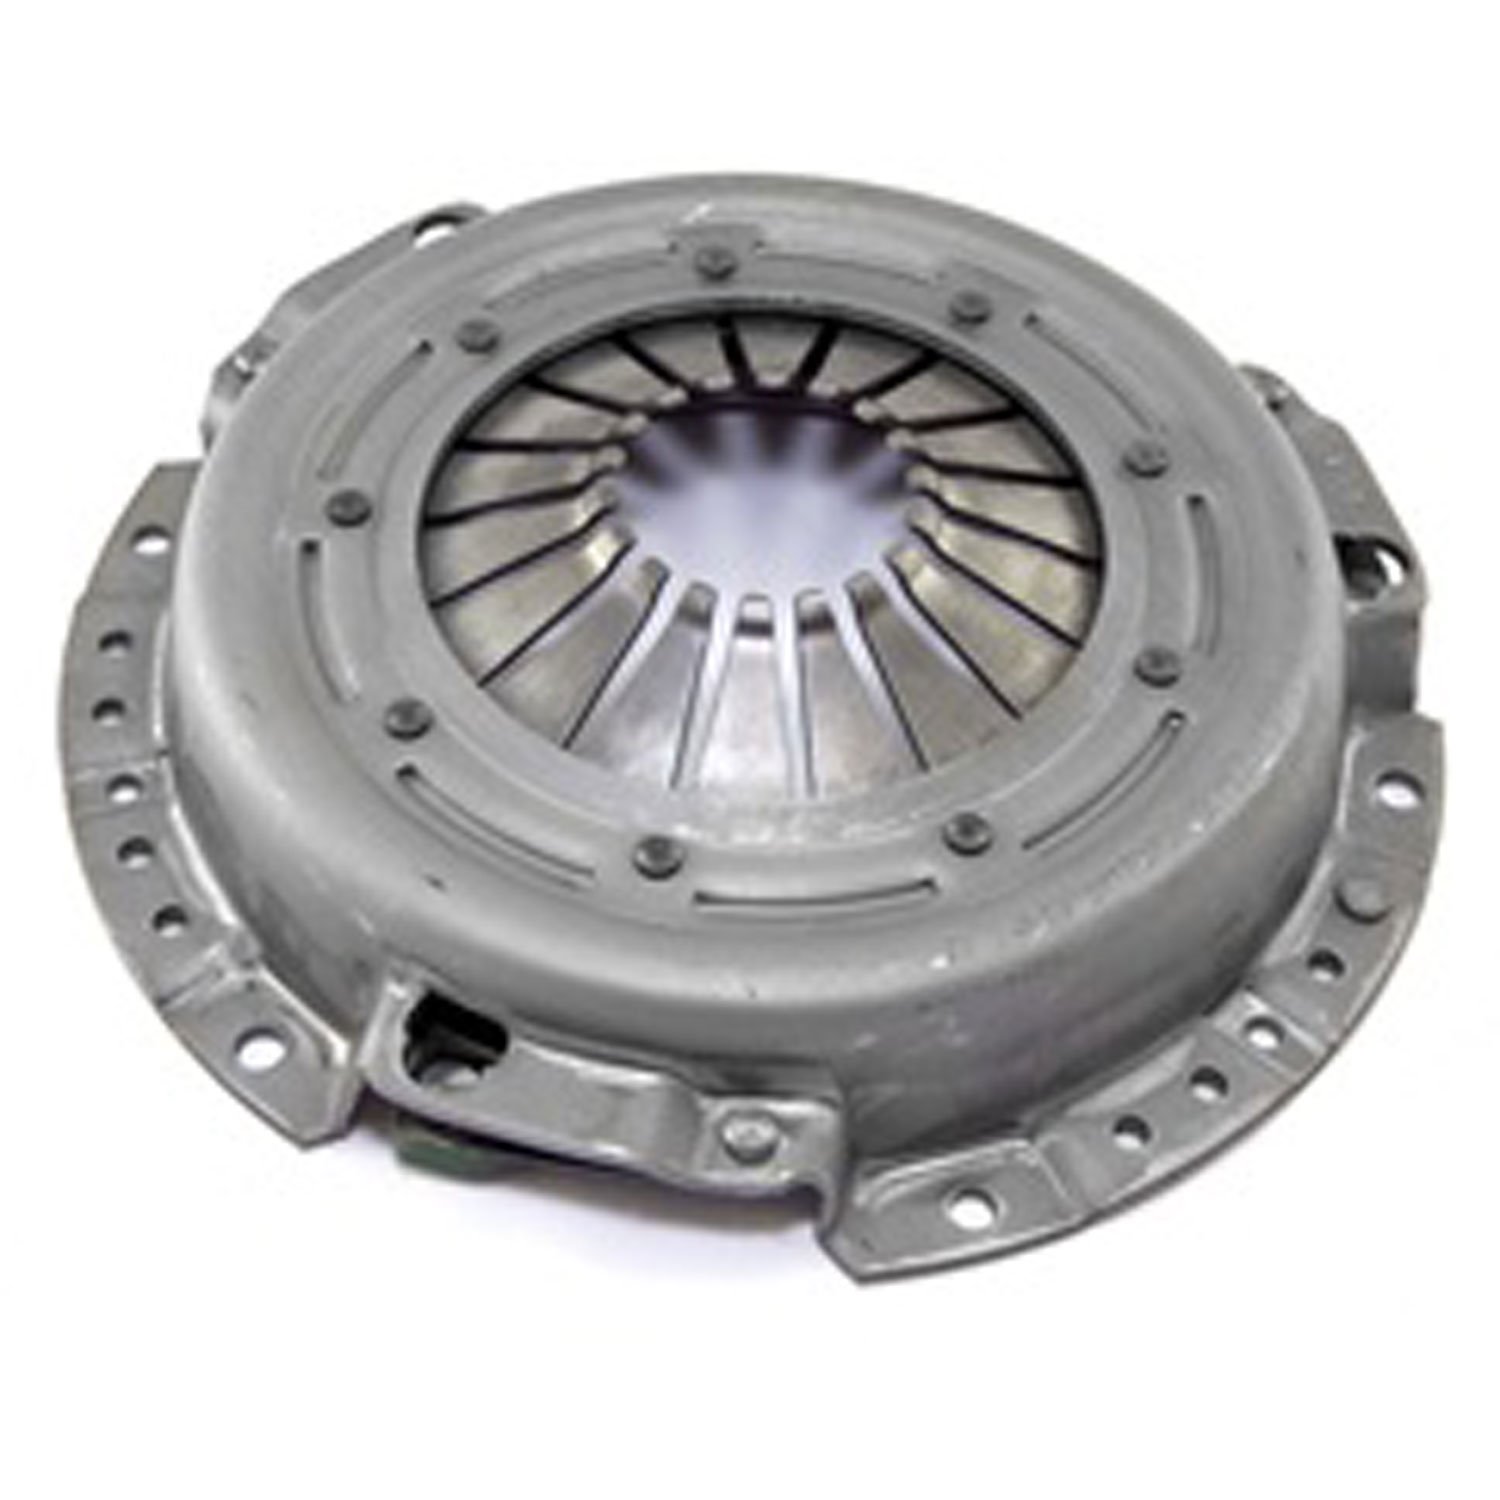 Replacement pressure plate from Omix-ADA, Fits 03-04 Jeep Wranglers with a 2.4L engine.